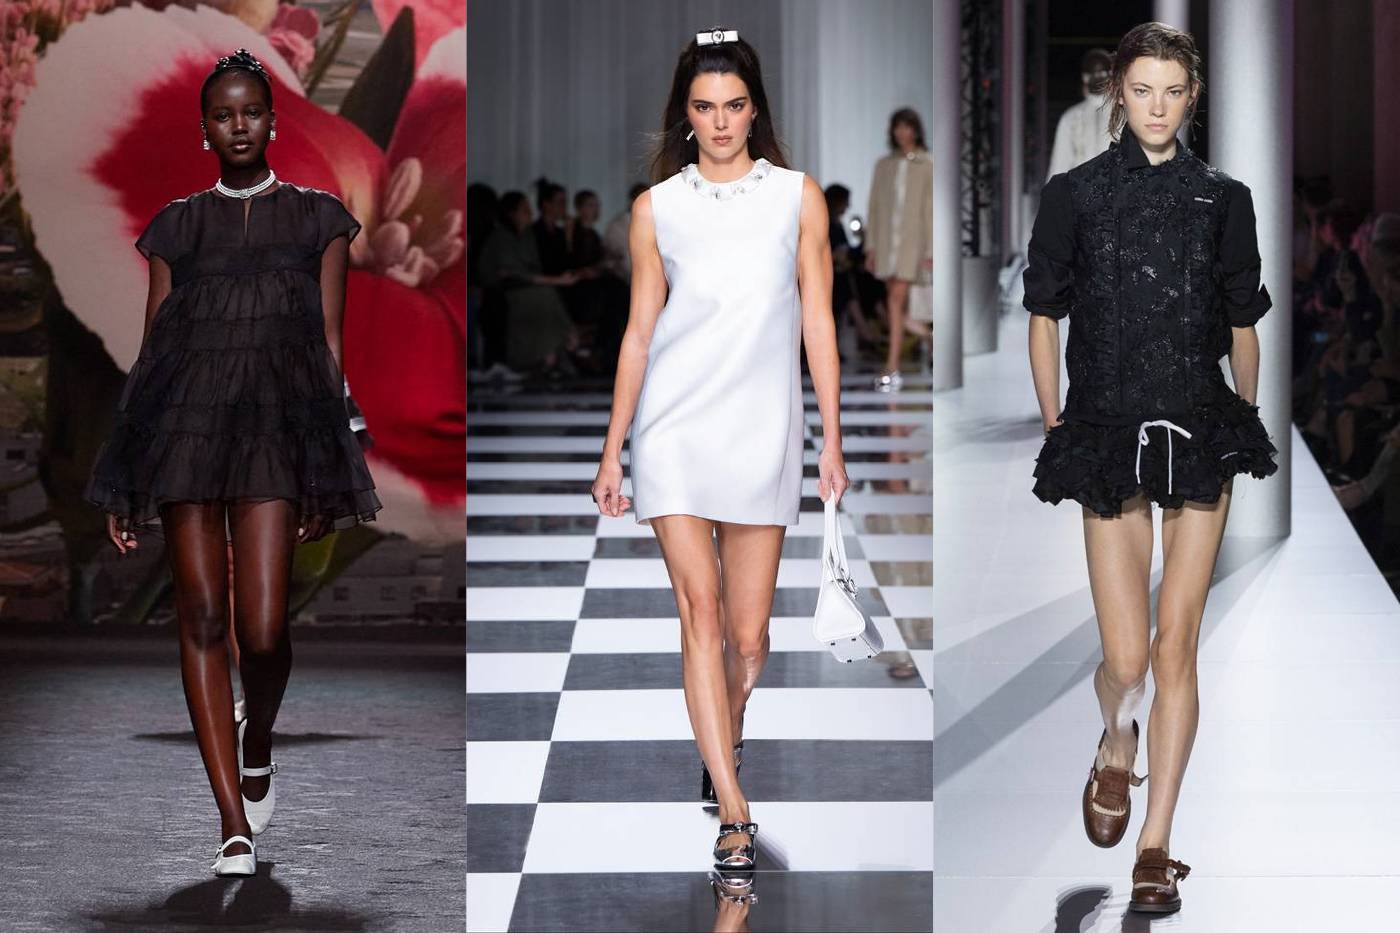 Spring Fashion 2023: Shop Dresses, Skirts and More